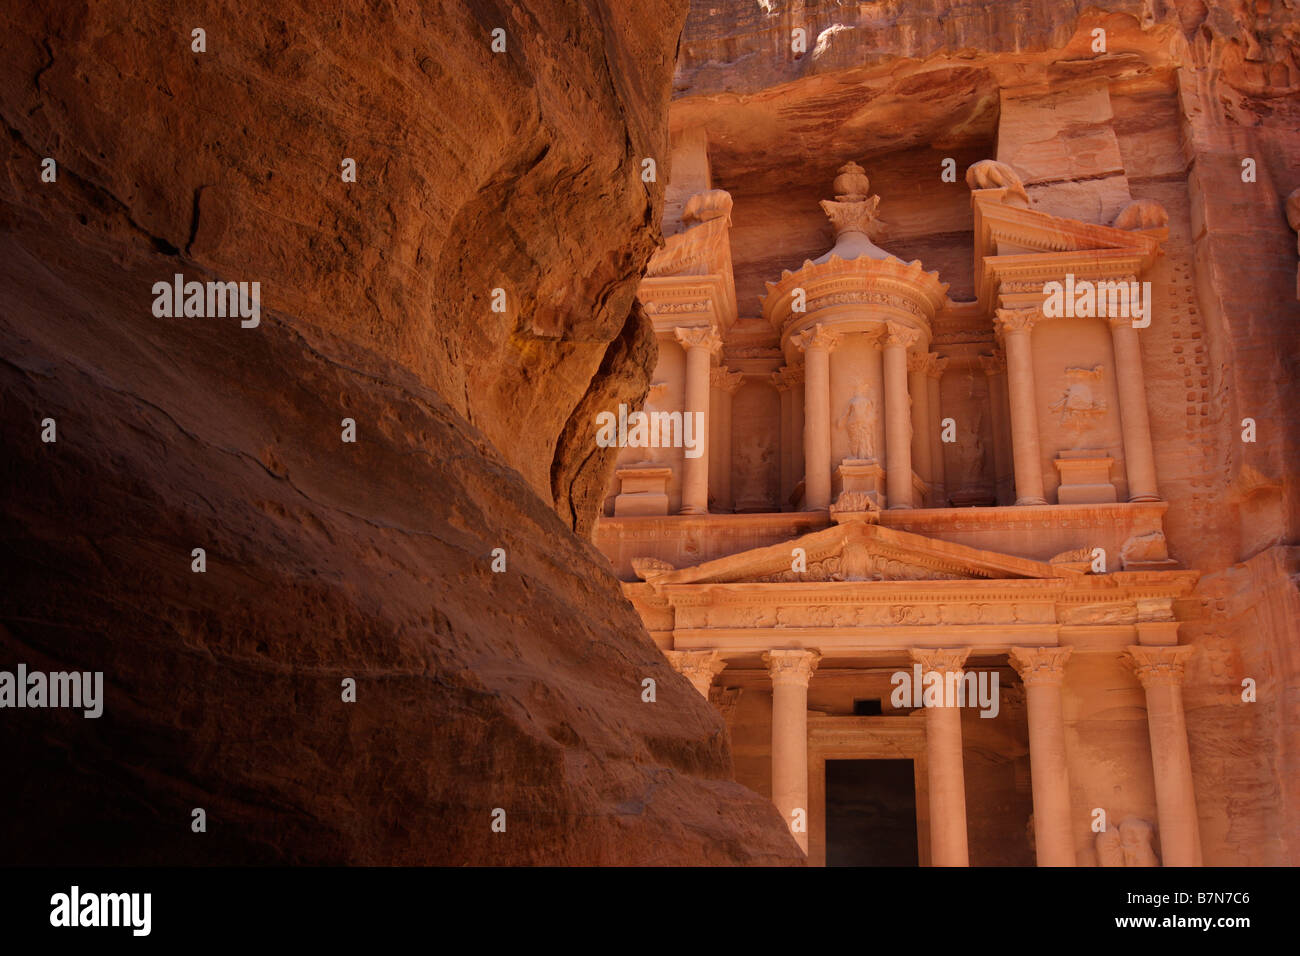 På daglig basis personlighed femte petra, jordan, middle, east, the, treasury, indiana, jones, and, the, last,  crus, temple, nabatean, archeology, archaeology Stock Photo - Alamy